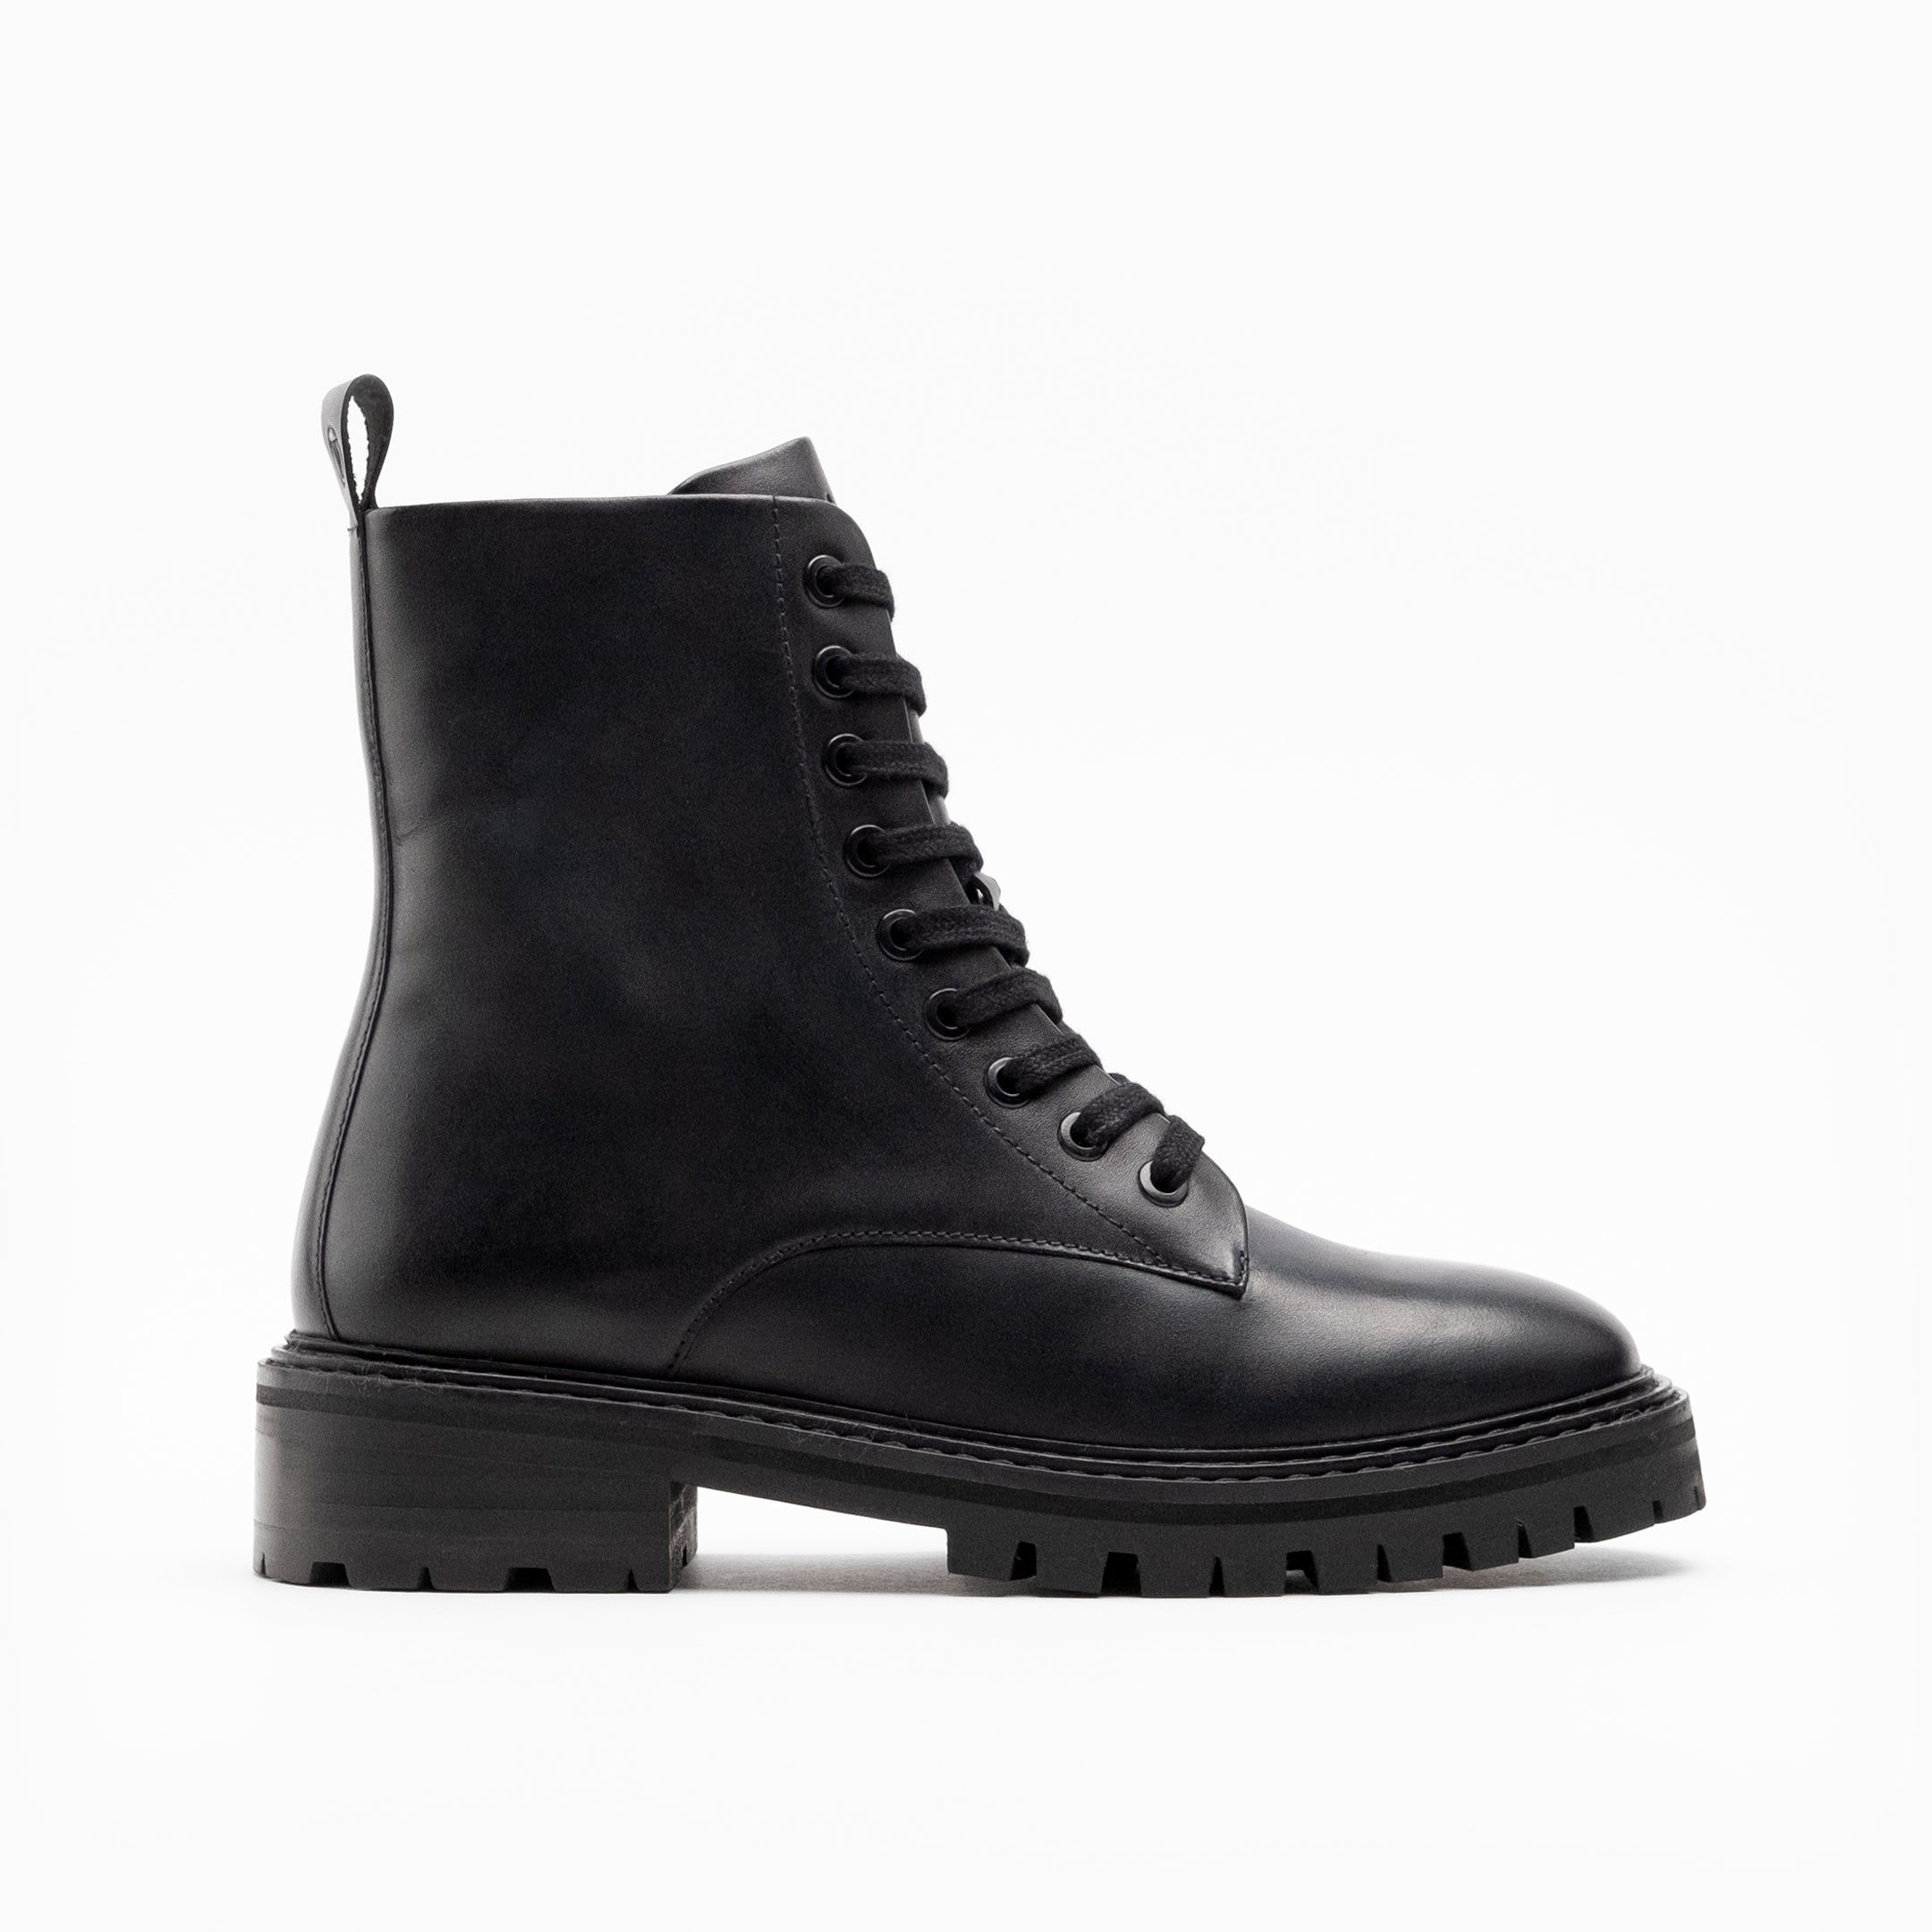 Walk London Womens Marina Lace Up Boot in Black Leather